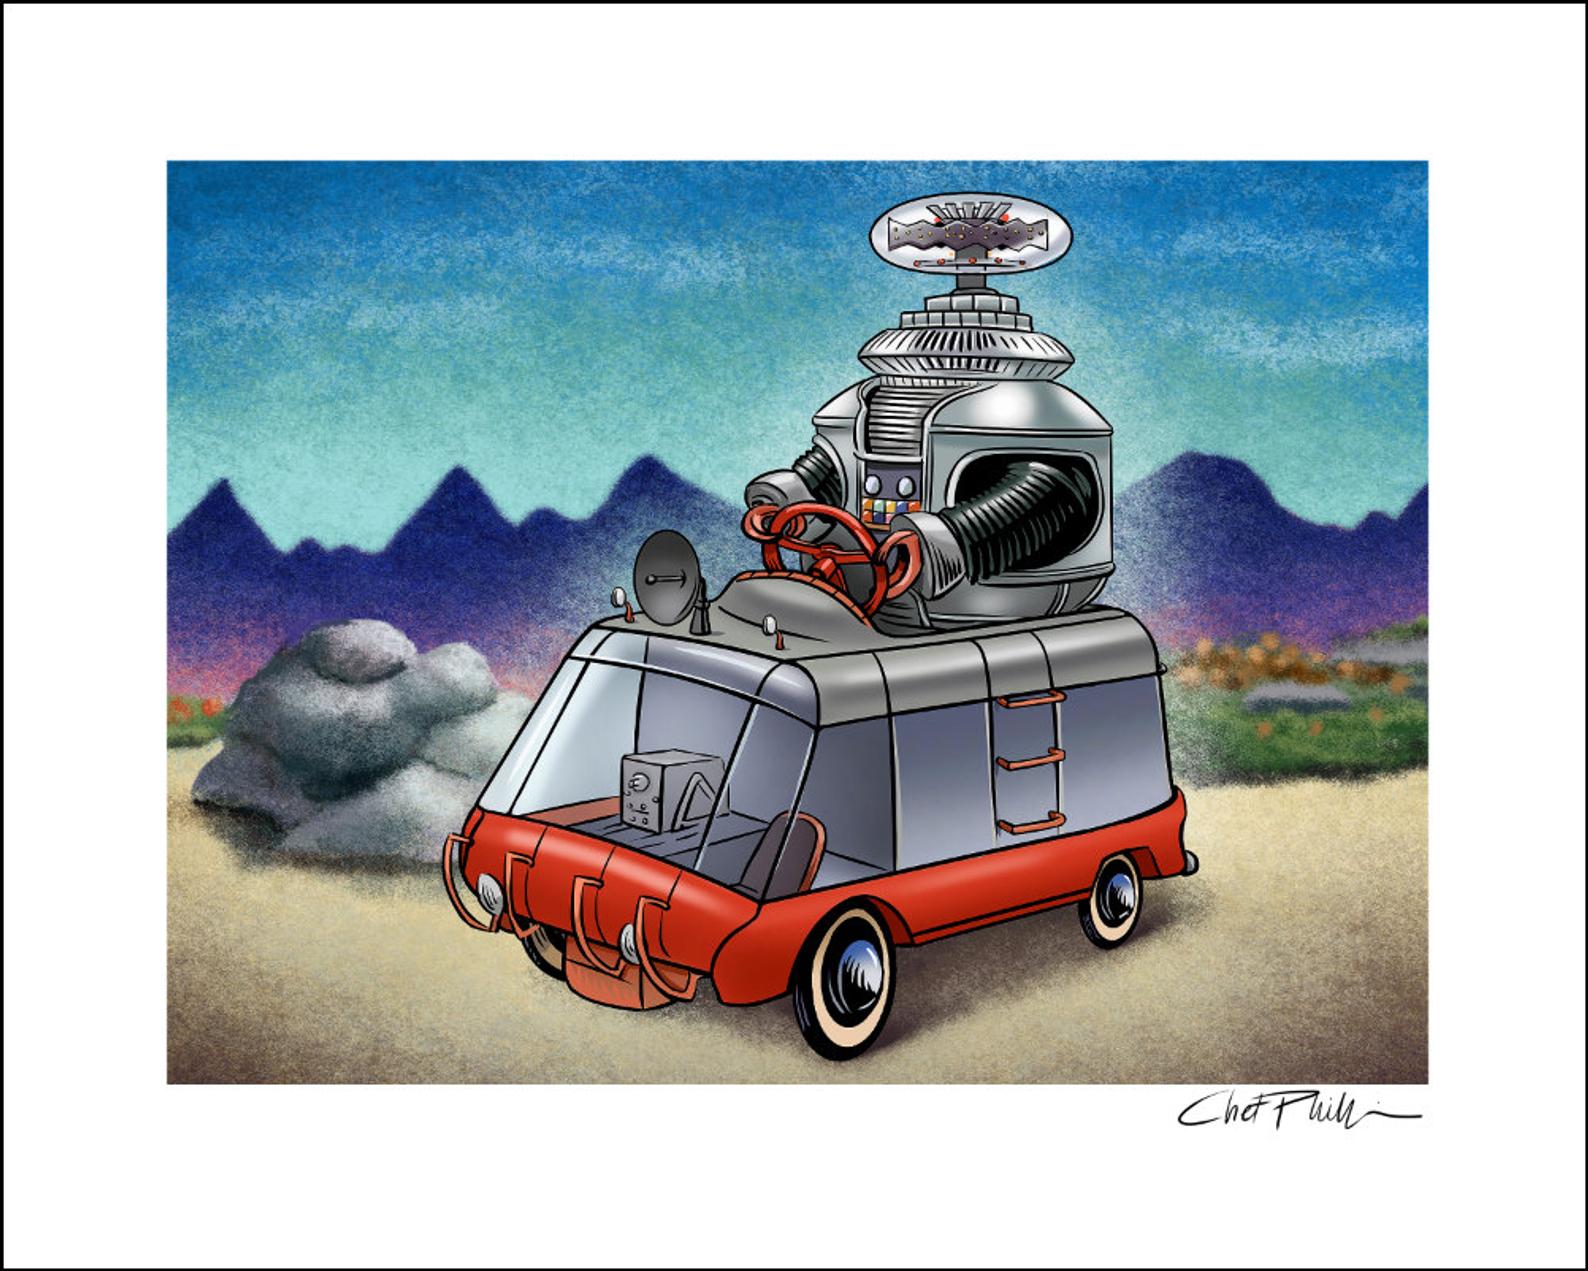 Lost in Space Pedal Car 8 x 10 print